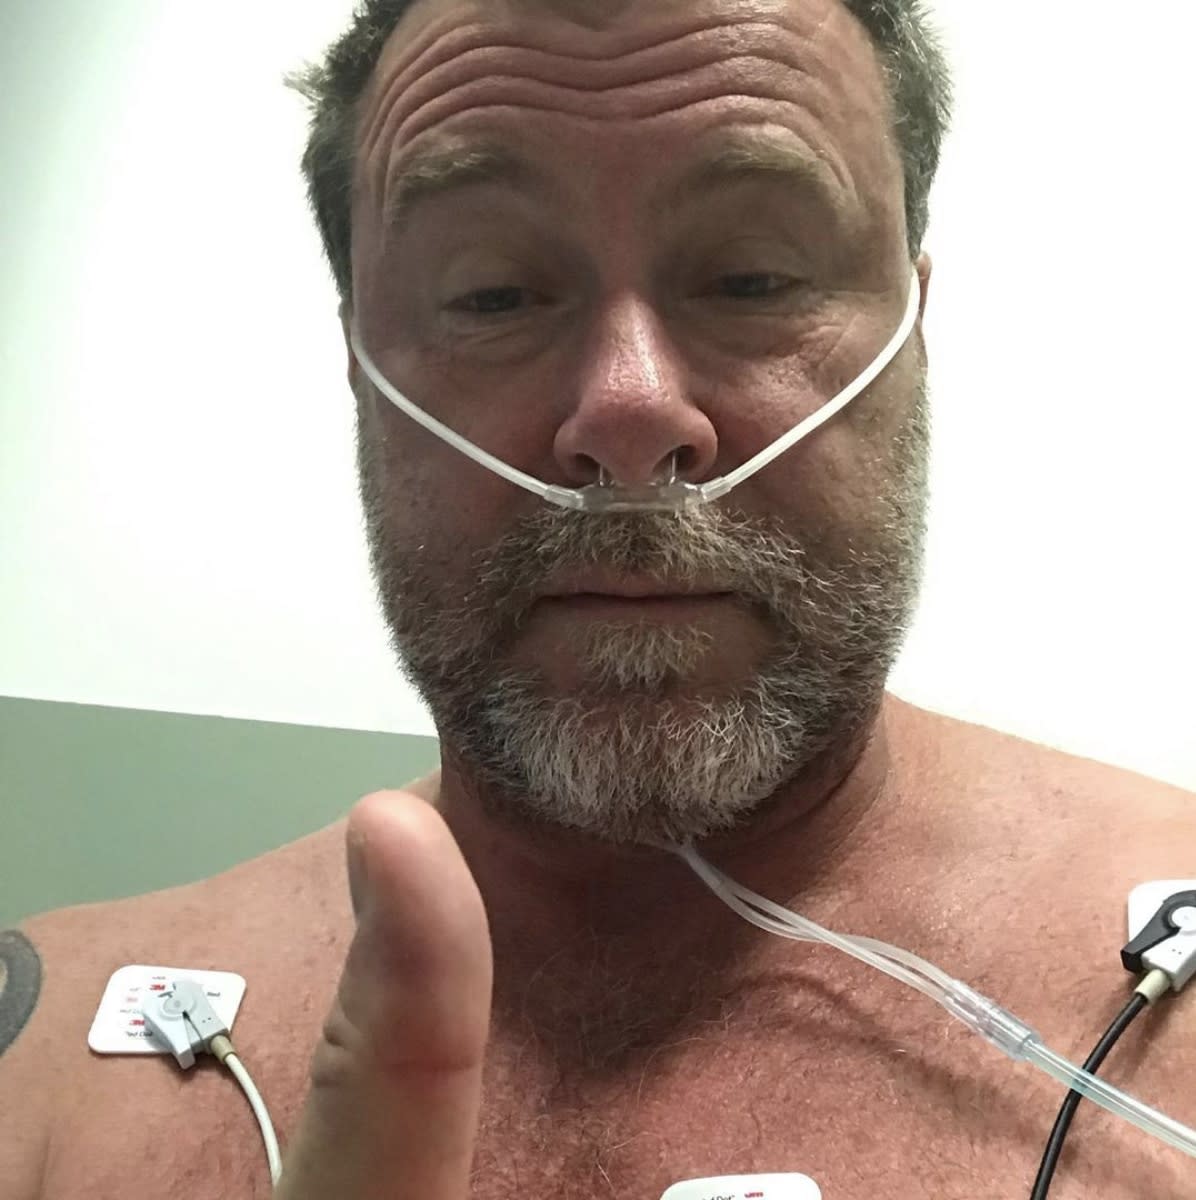 "Slasher" star Dean McDermott, husband of Tori Spelling, was admitted to the hospital Sunday night, June 30, 2019, with "pneumonia, possible meningitis." The Canadian-American actor posted a photo of him in a hospital bed, captioned: "I've never been so sick in my life!!!! Thumbs up and spirits up though."